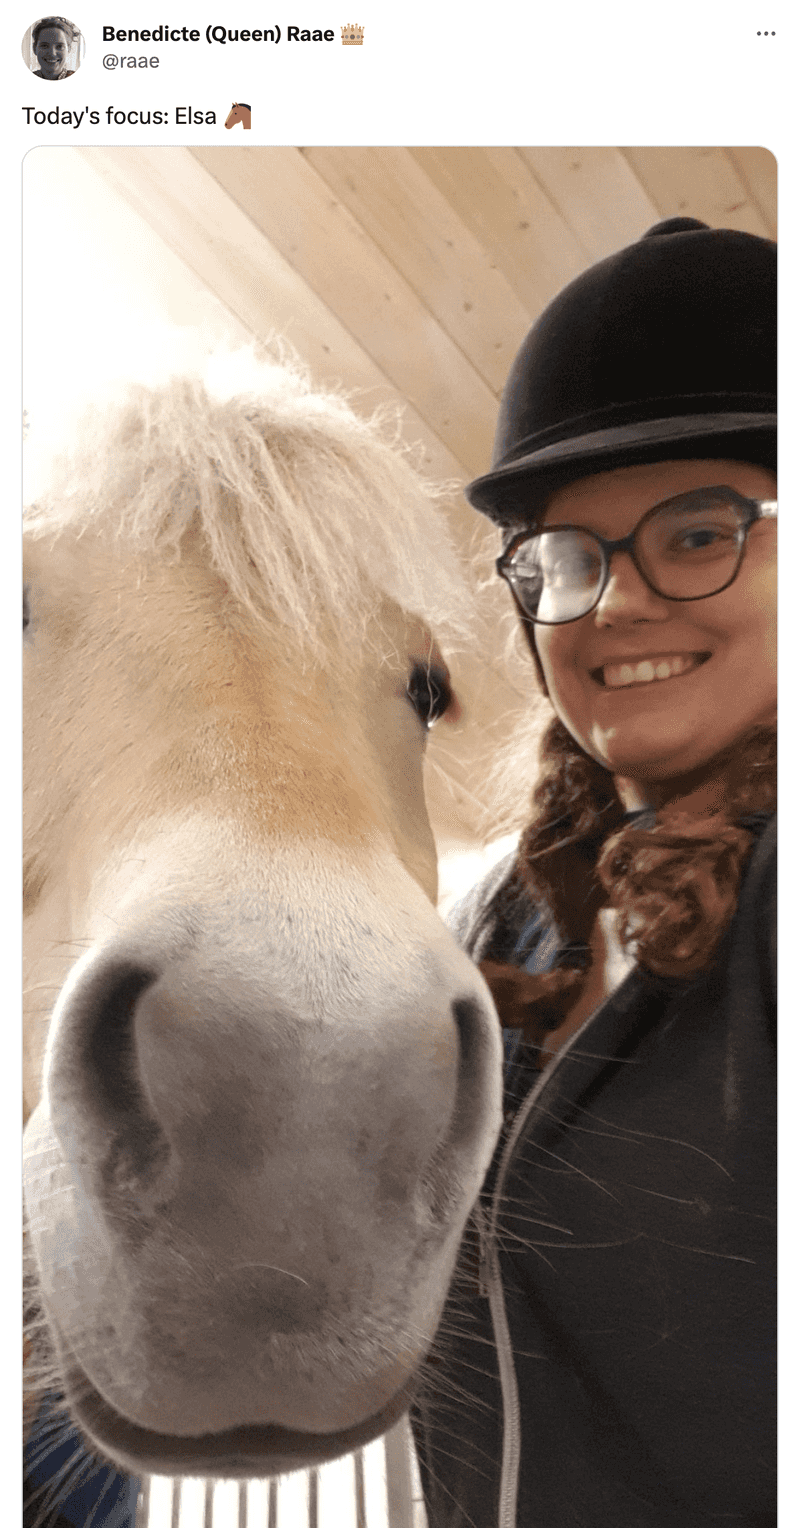 Me and the horse Elsa